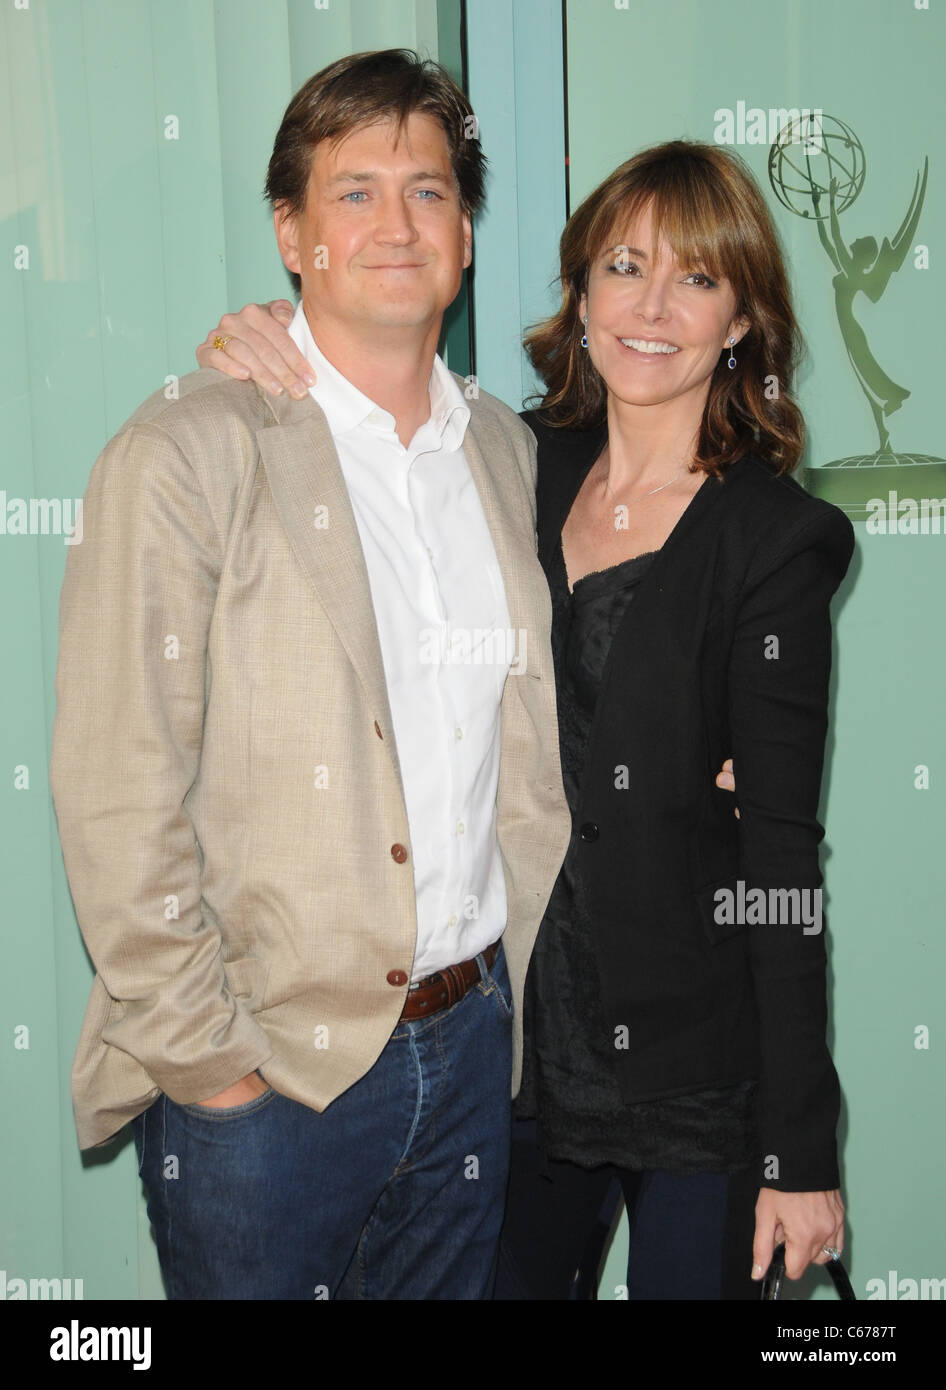 Bill Lawrence, Christa Miller in attendance for ATAS Presents An Evening With COUGAR TOWN, Leonard H. Goldenson Theatre, Los Angeles, CA April 20, 2011. Photo By: Dee Cercone/Everett Collection Stock Photo